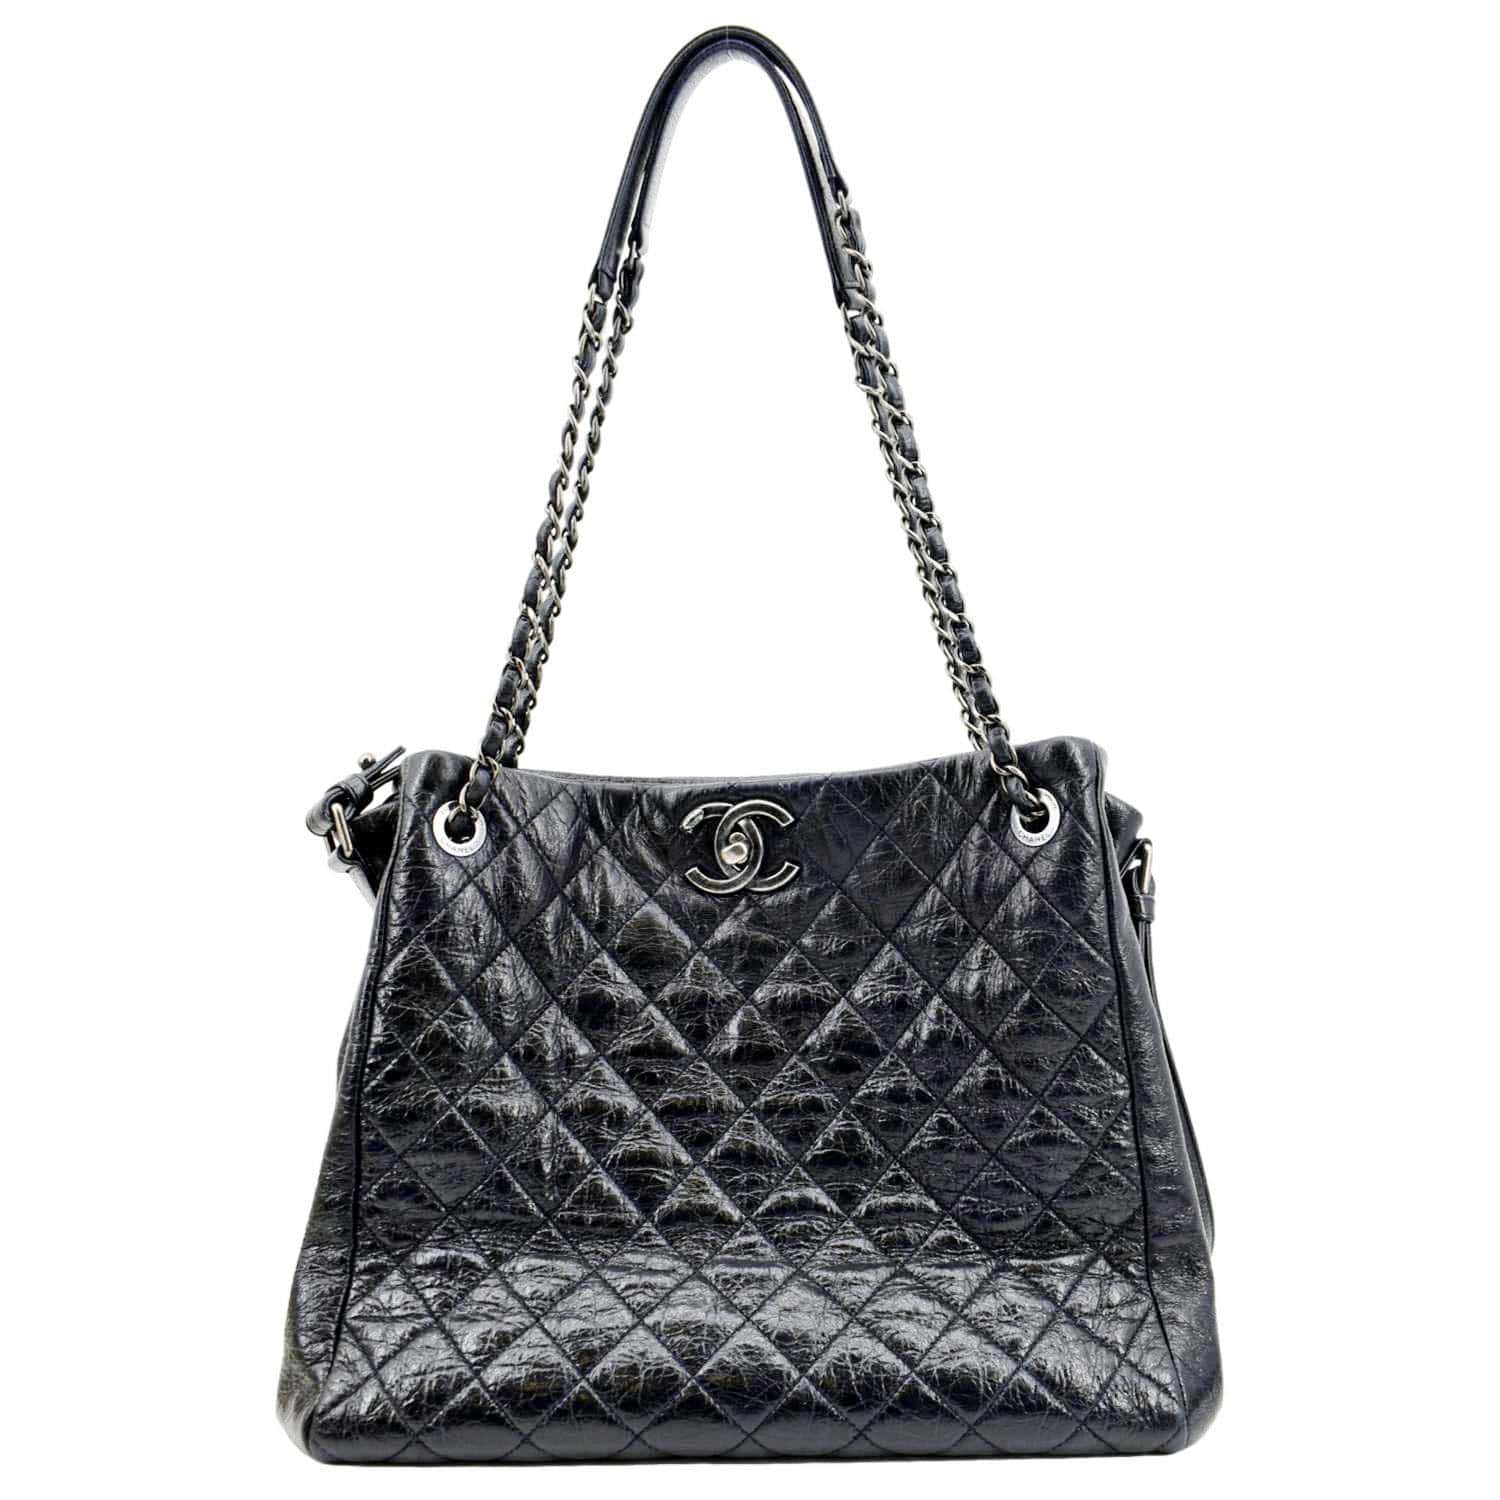 All Products Tagged Style_Shoulder Bag - The Purse Ladies